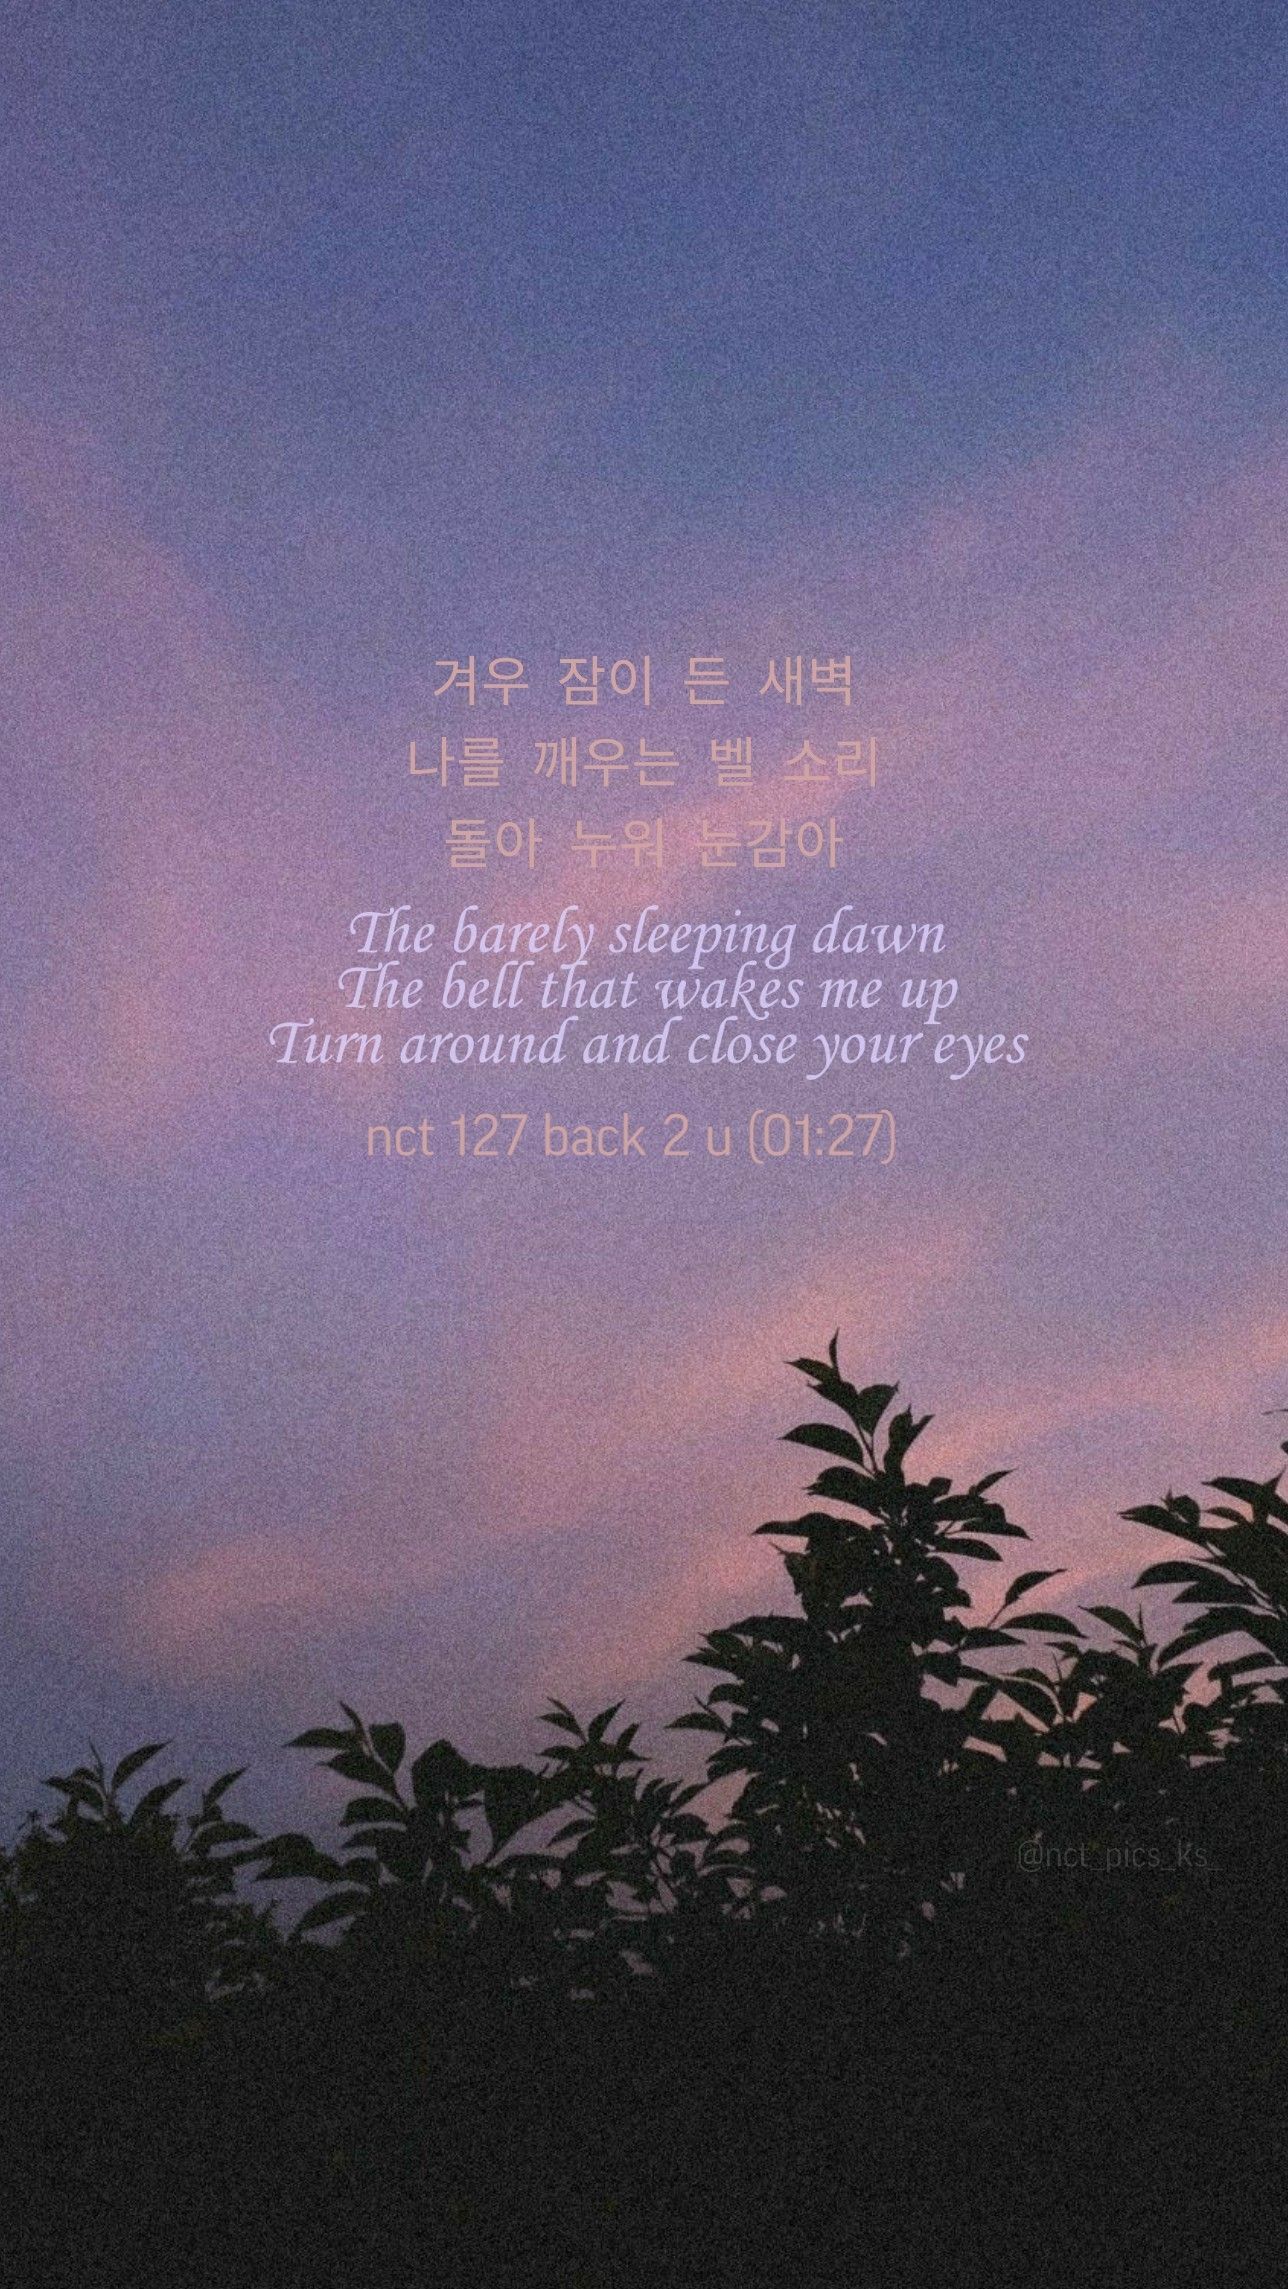 NCT Quotes Wallpapers - Wallpaper Cave